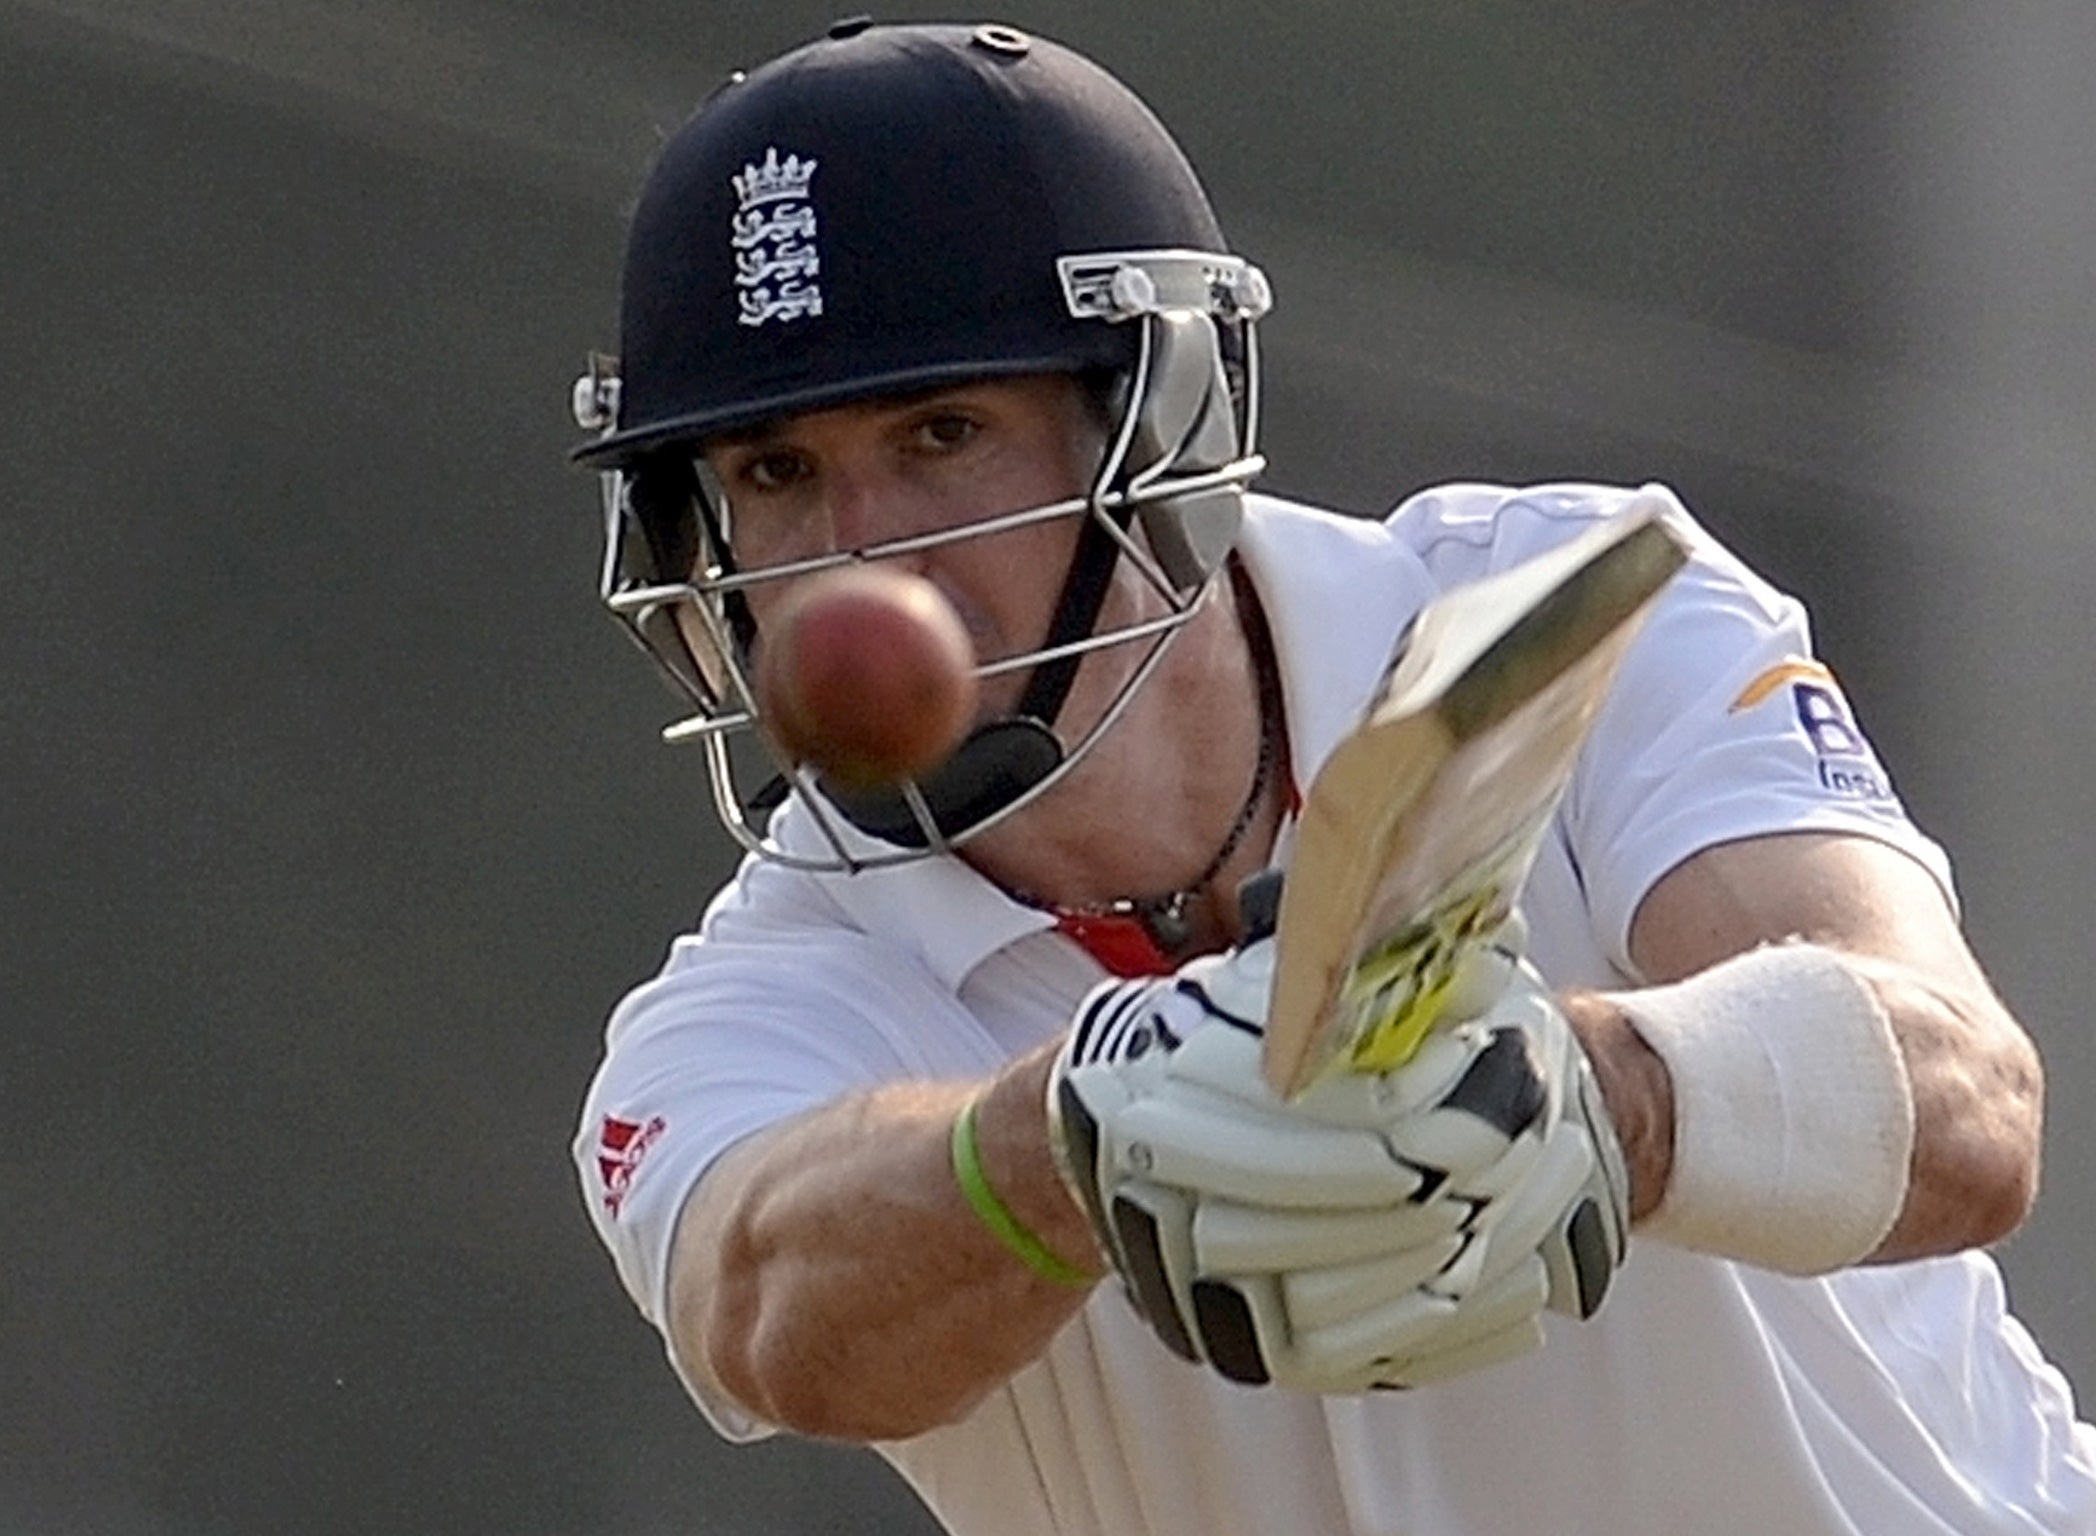 Pietersen (186) and Cook (122) both moved level on 22 hundreds with three all-time greats in Wally Hammond, Geoff Boycott and Colin Cowdrey as England's most prolific Test centurions.